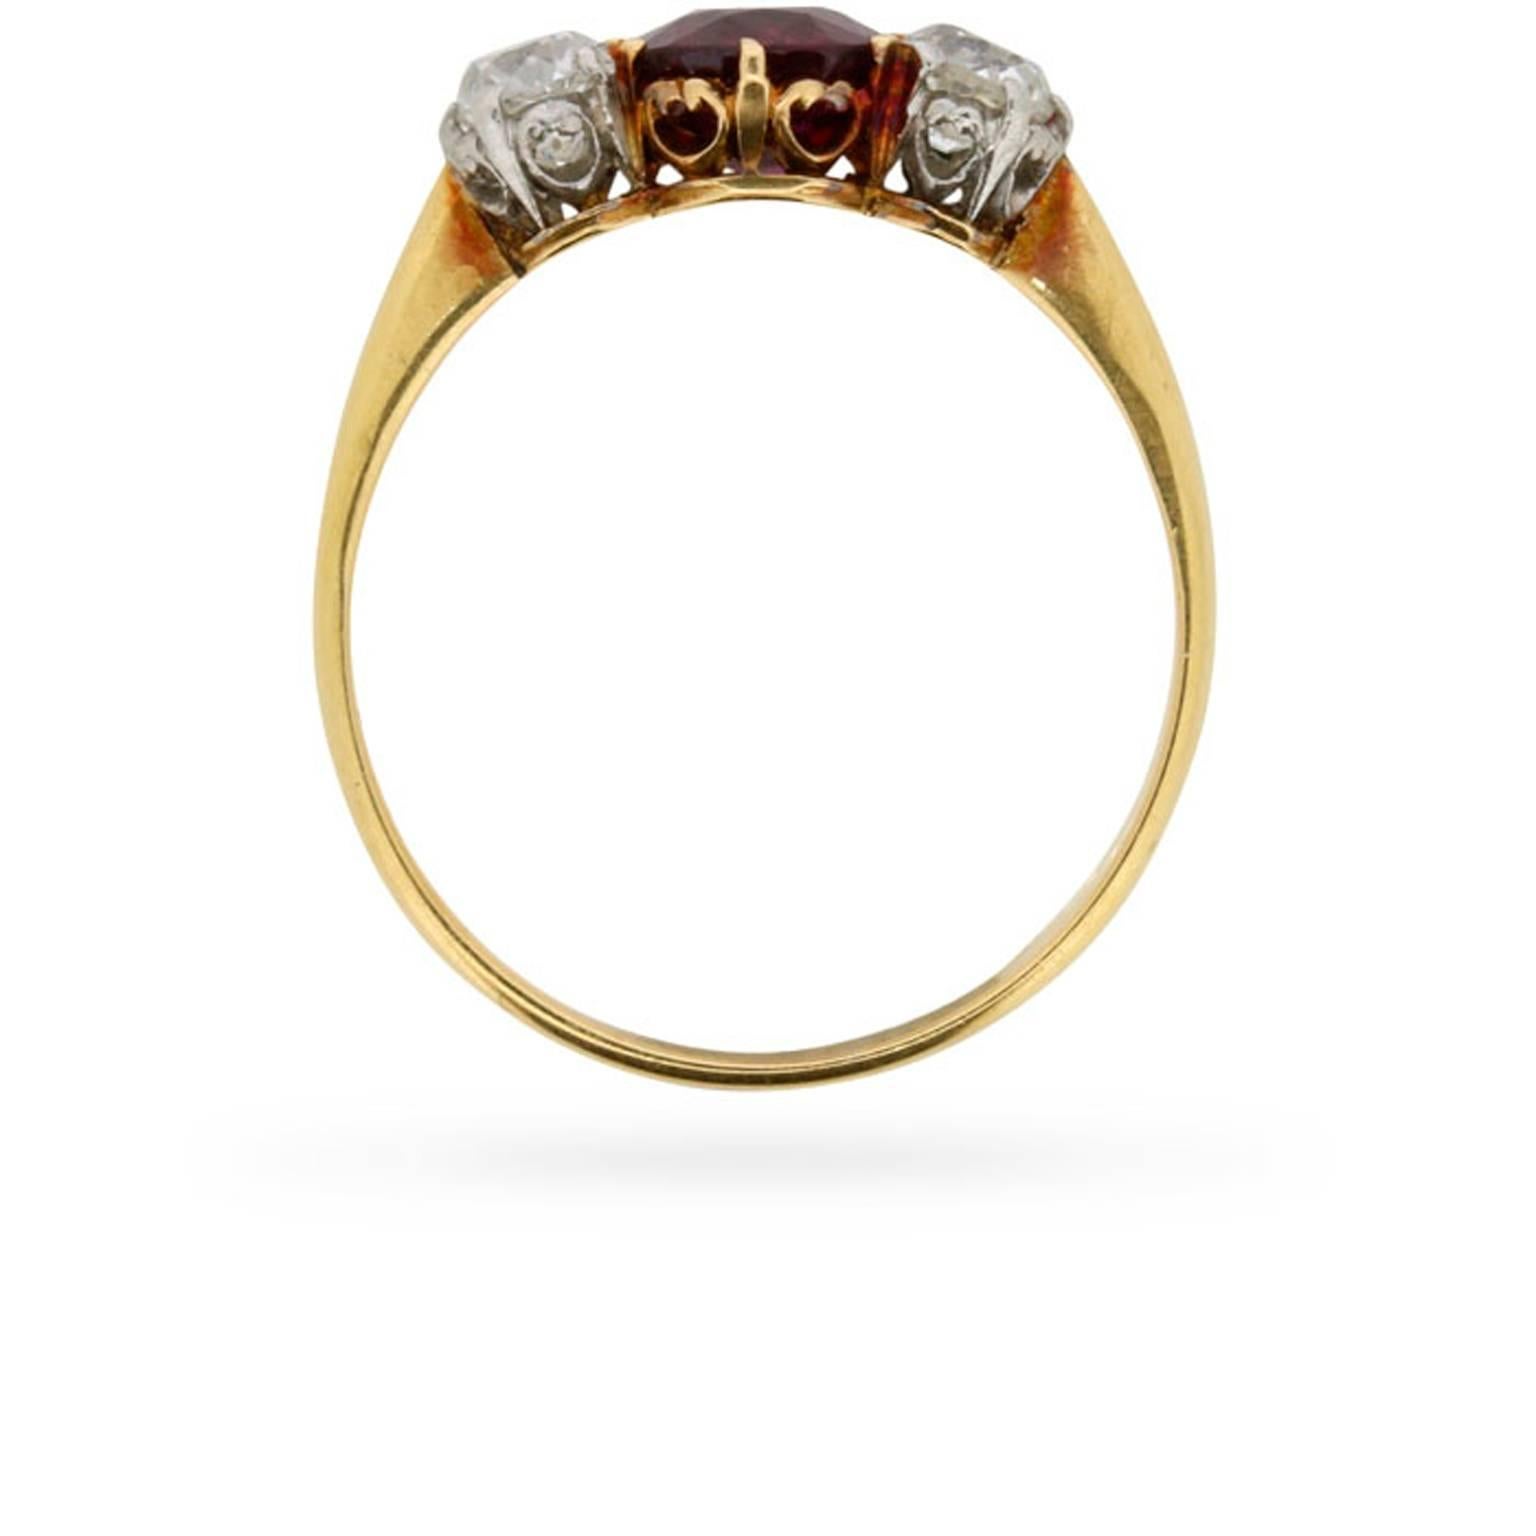 A vibrant 1.01 carat old cut ruby is joined on either side by a 0.25 carat old cut diamond at the centre of this late Victorian/early Edwardian era three stone ring.

This sumptous antique ruby is claw set in 18 carat yellow gold and the diamonds